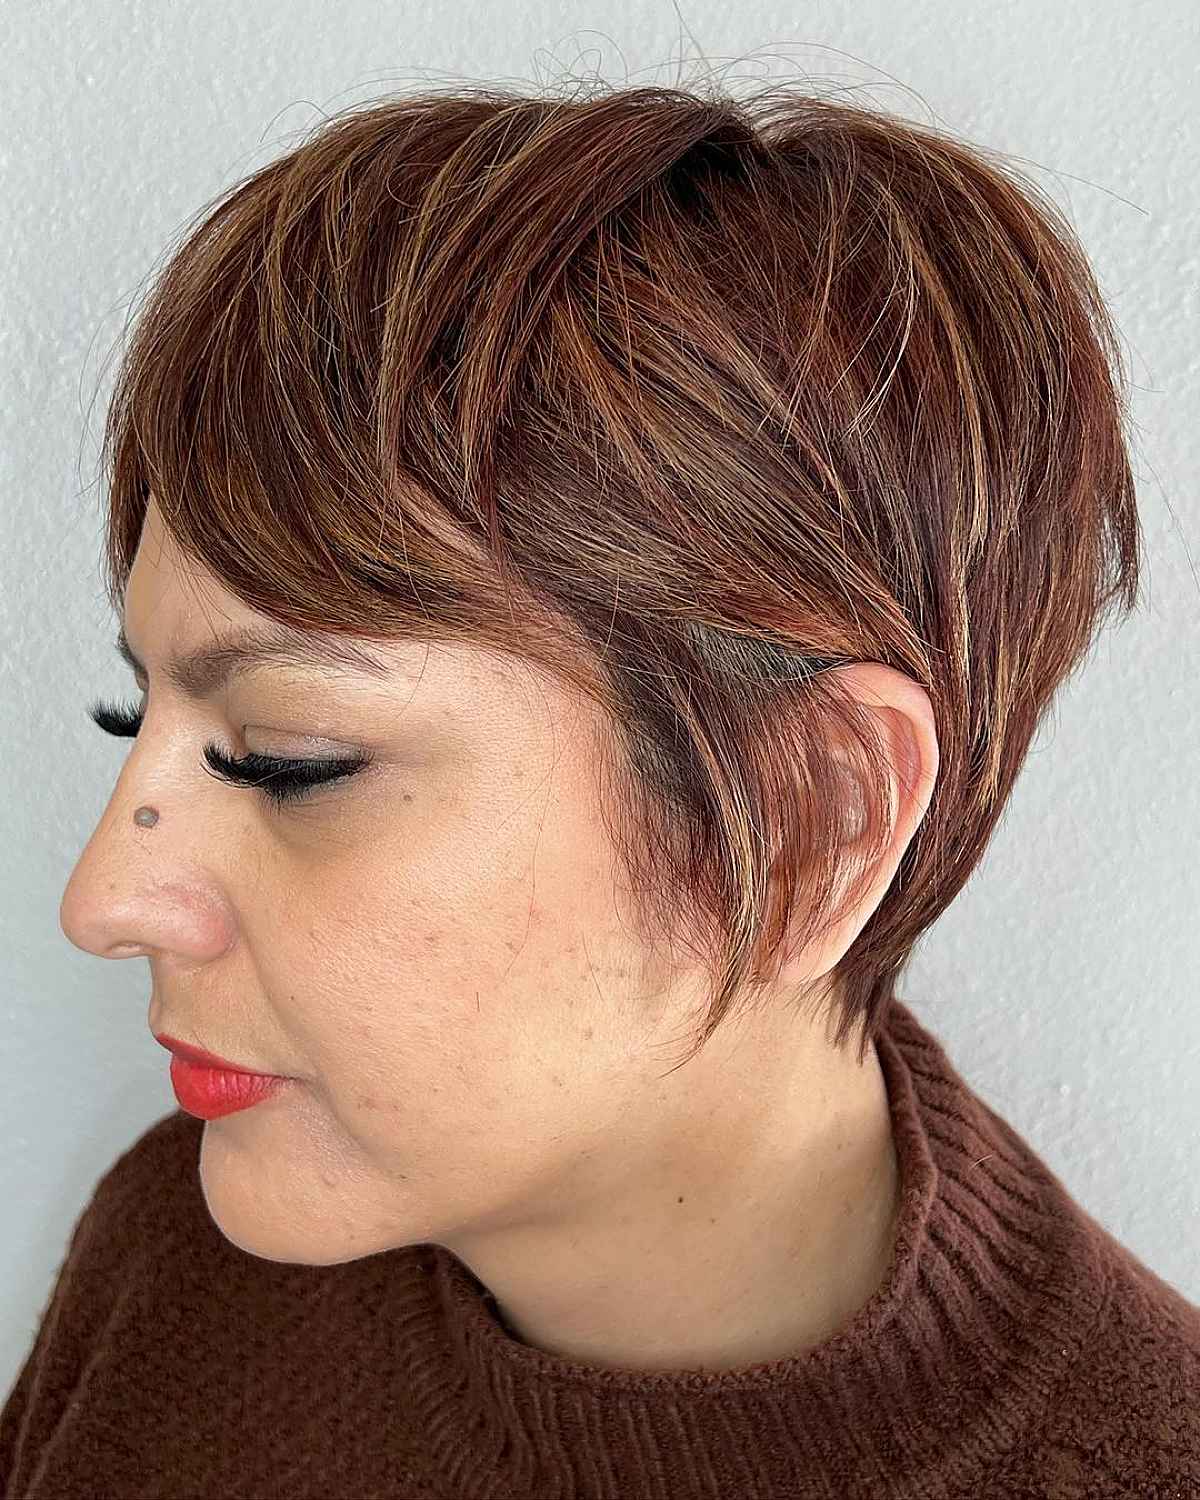 Bixie Cut with a Fringe and Shorter Layers